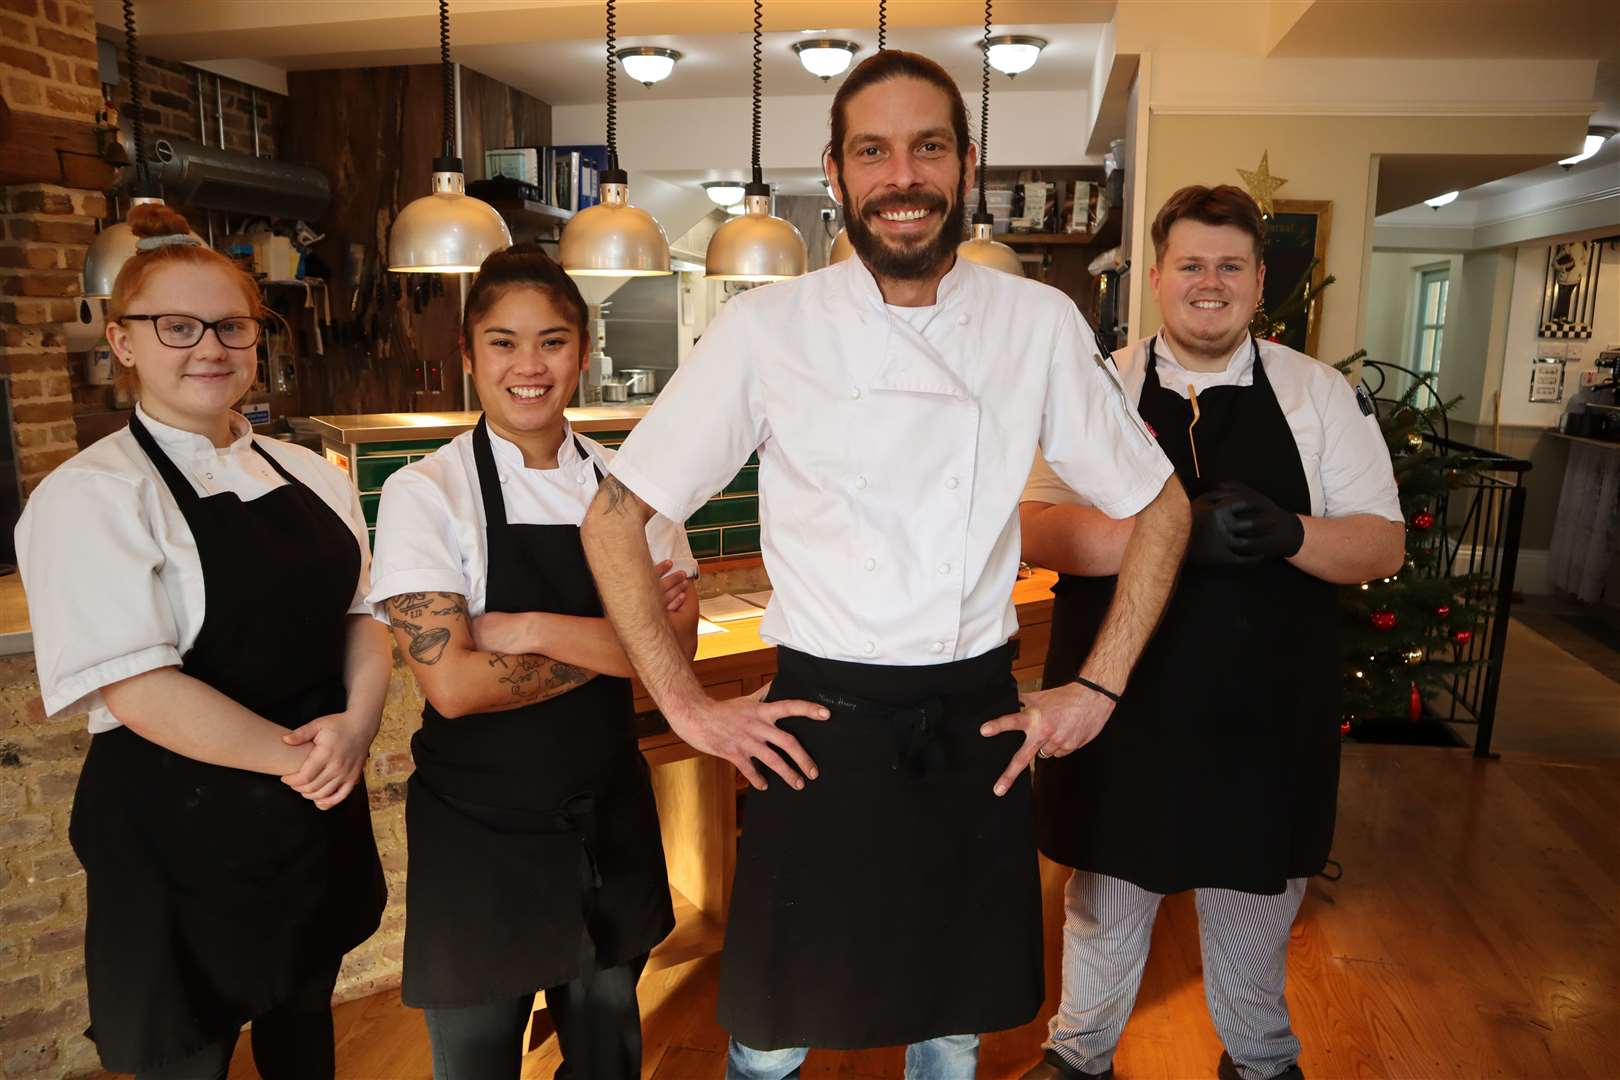 Head chef Bernard Johnson and his team, from the left, Gee, Blake Verlin and Ashleigh Hutchison, at Banks Restaurant in Minster on Sheppey. It was formerly the Prince of Waterloo pub